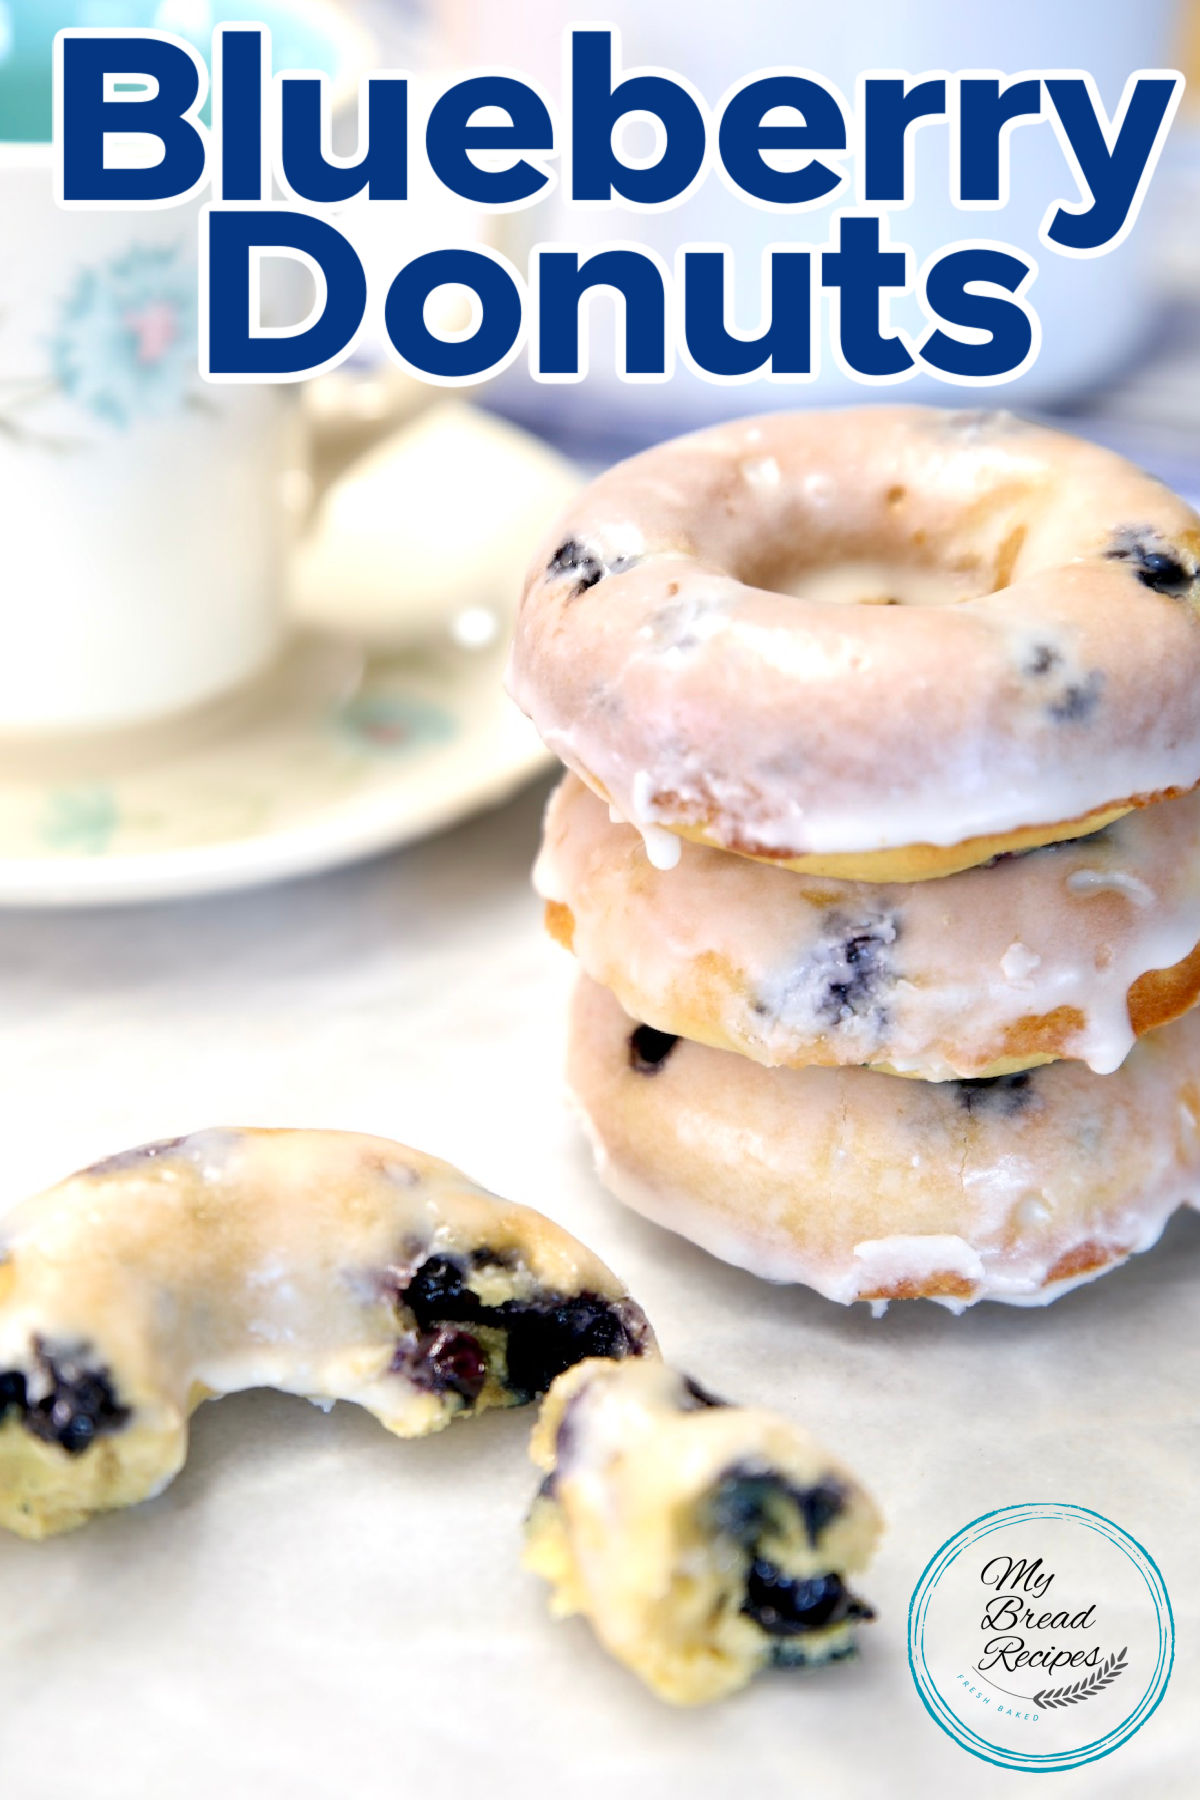 Stack of blueberry donuts, one in half, text overlay.